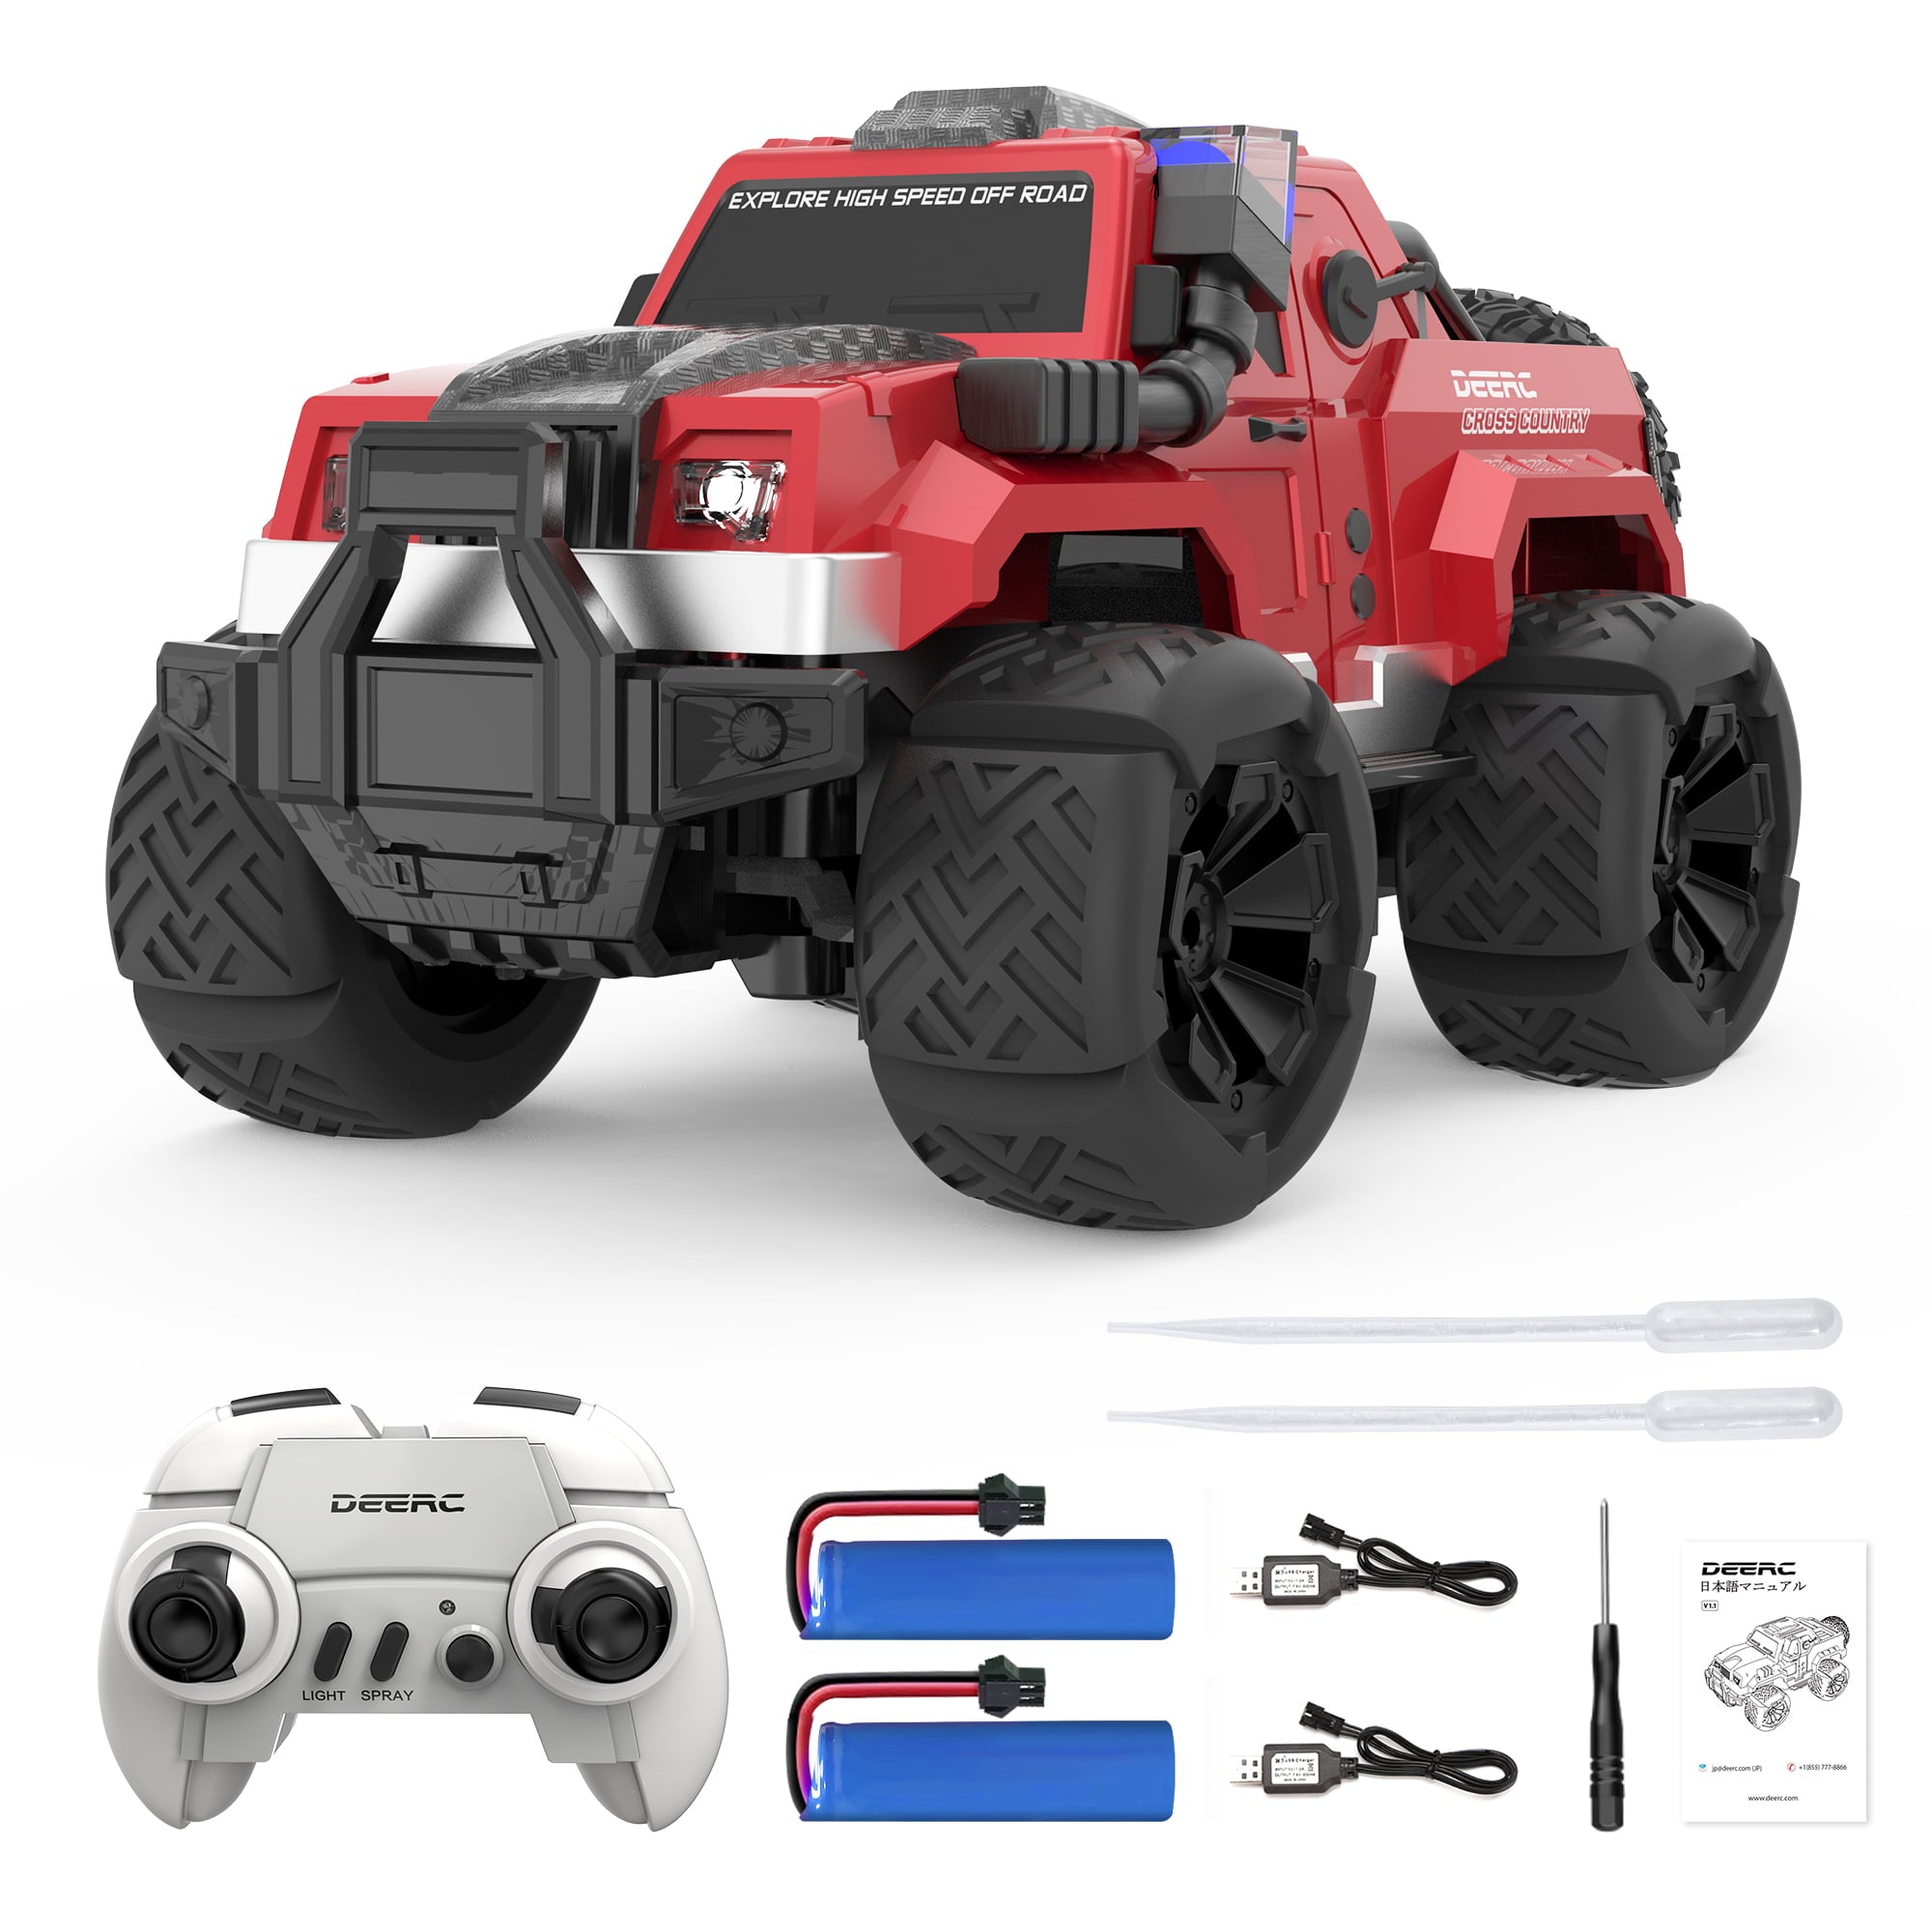 DEERC DE68 Remote Control Car for Kids RC Car with LED Headlights Spray and Snorkel 2.4GHz Off Road SUV All-terrain Monster Truck for Boys Girls